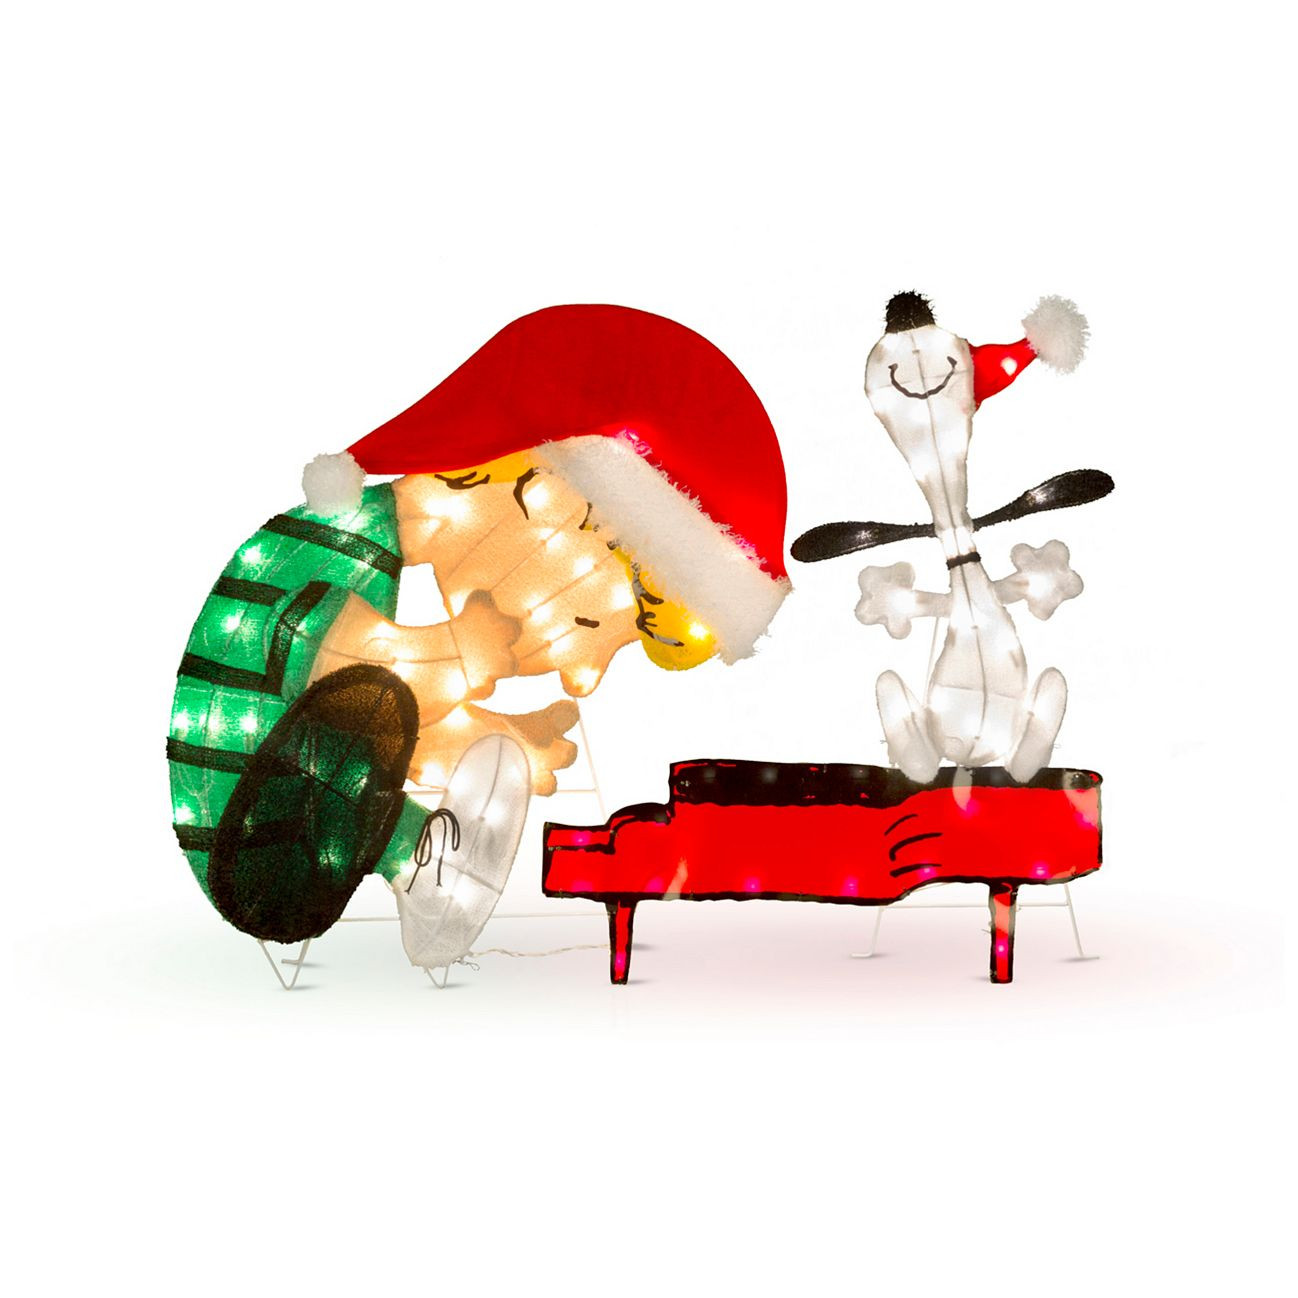 Lighted Schroeder and Dancing Snoopy Peanuts Christmas Decoration